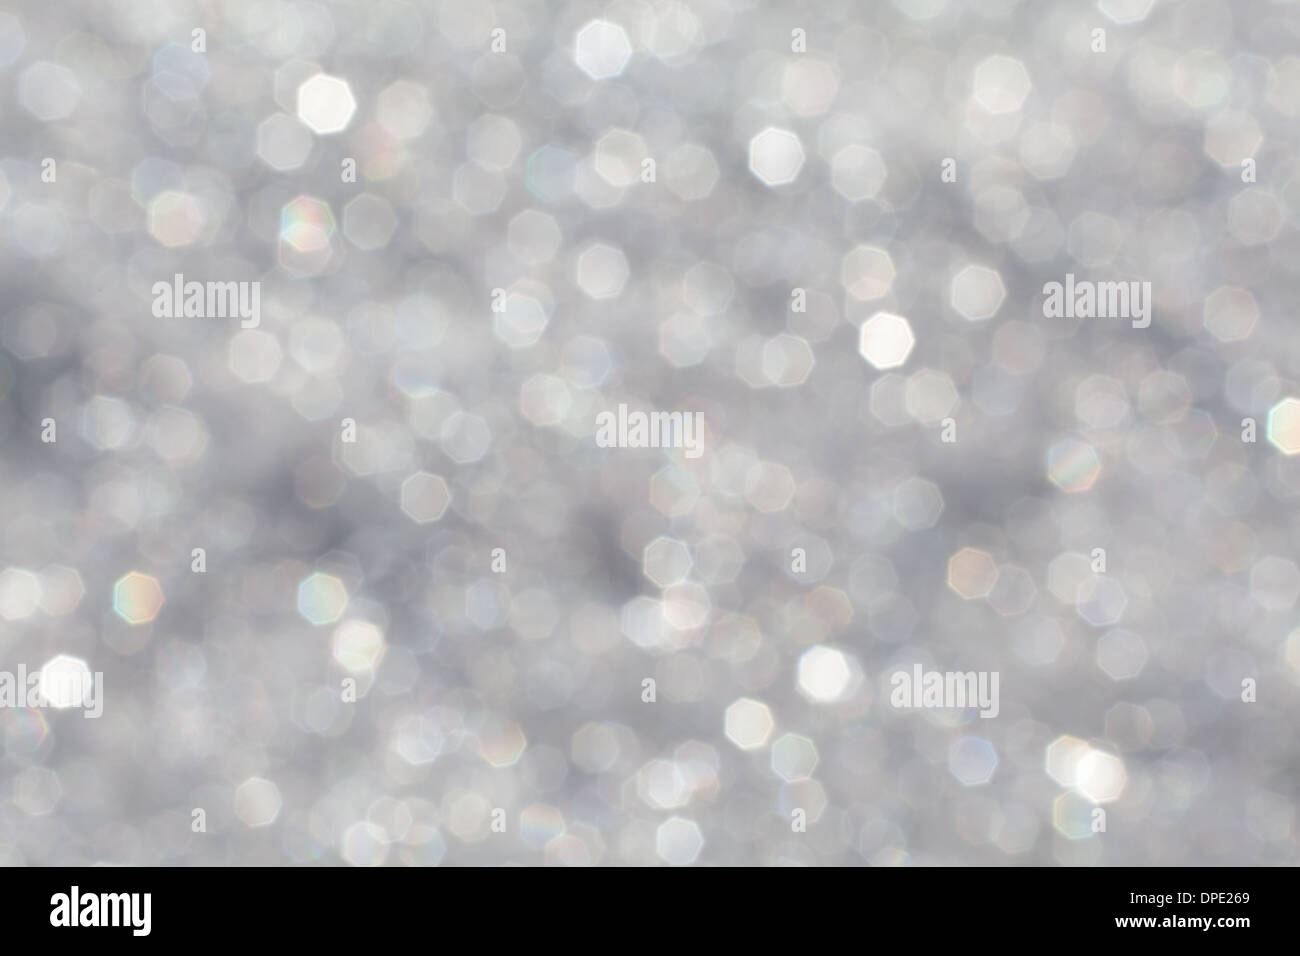 Three Red Glitter Snowflakes Stock Image - Image of snow, glitter